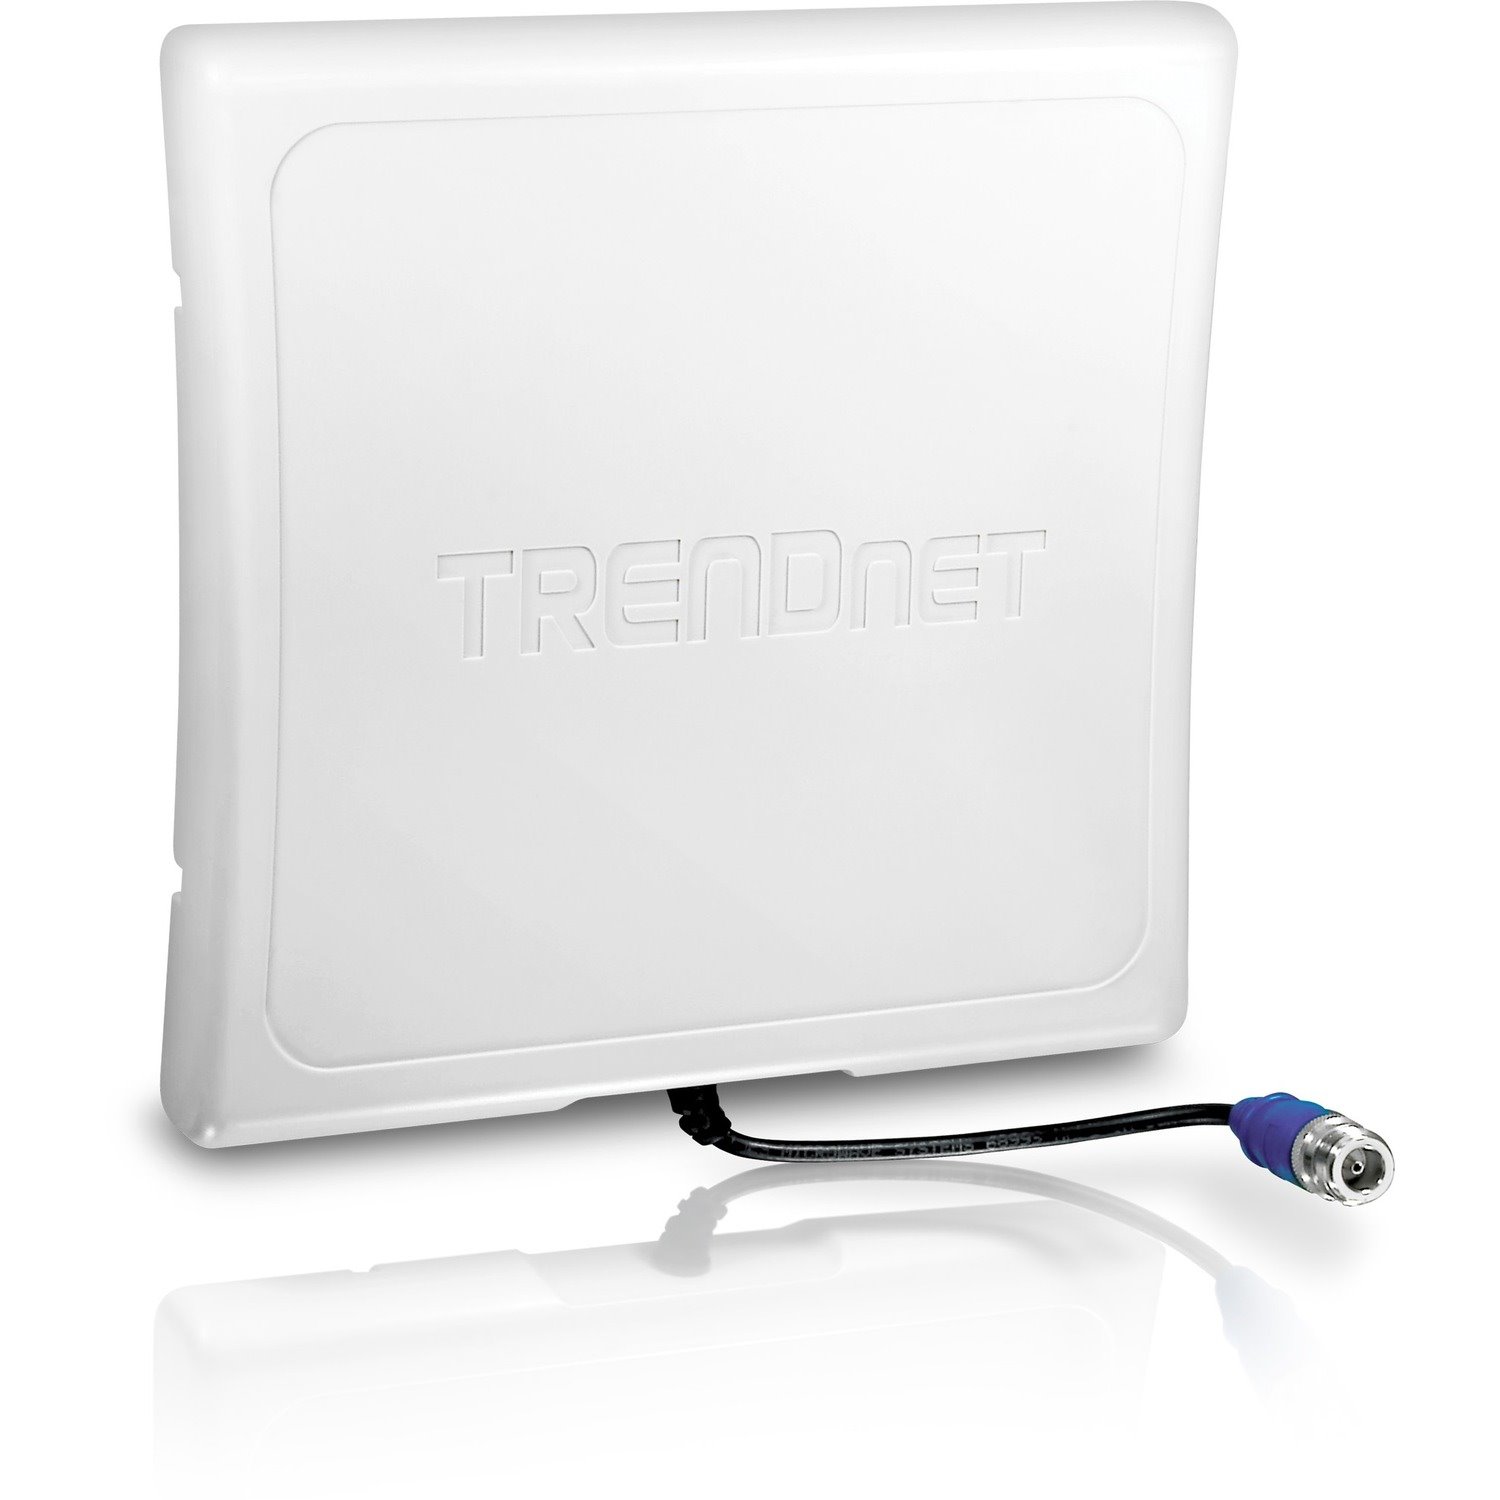 TRENDnet 14dBi Outdoor High Gain Directional Antenna; Compatible with 2.4GHz 802.11b/g Wireless Devices; TEW-AO14D